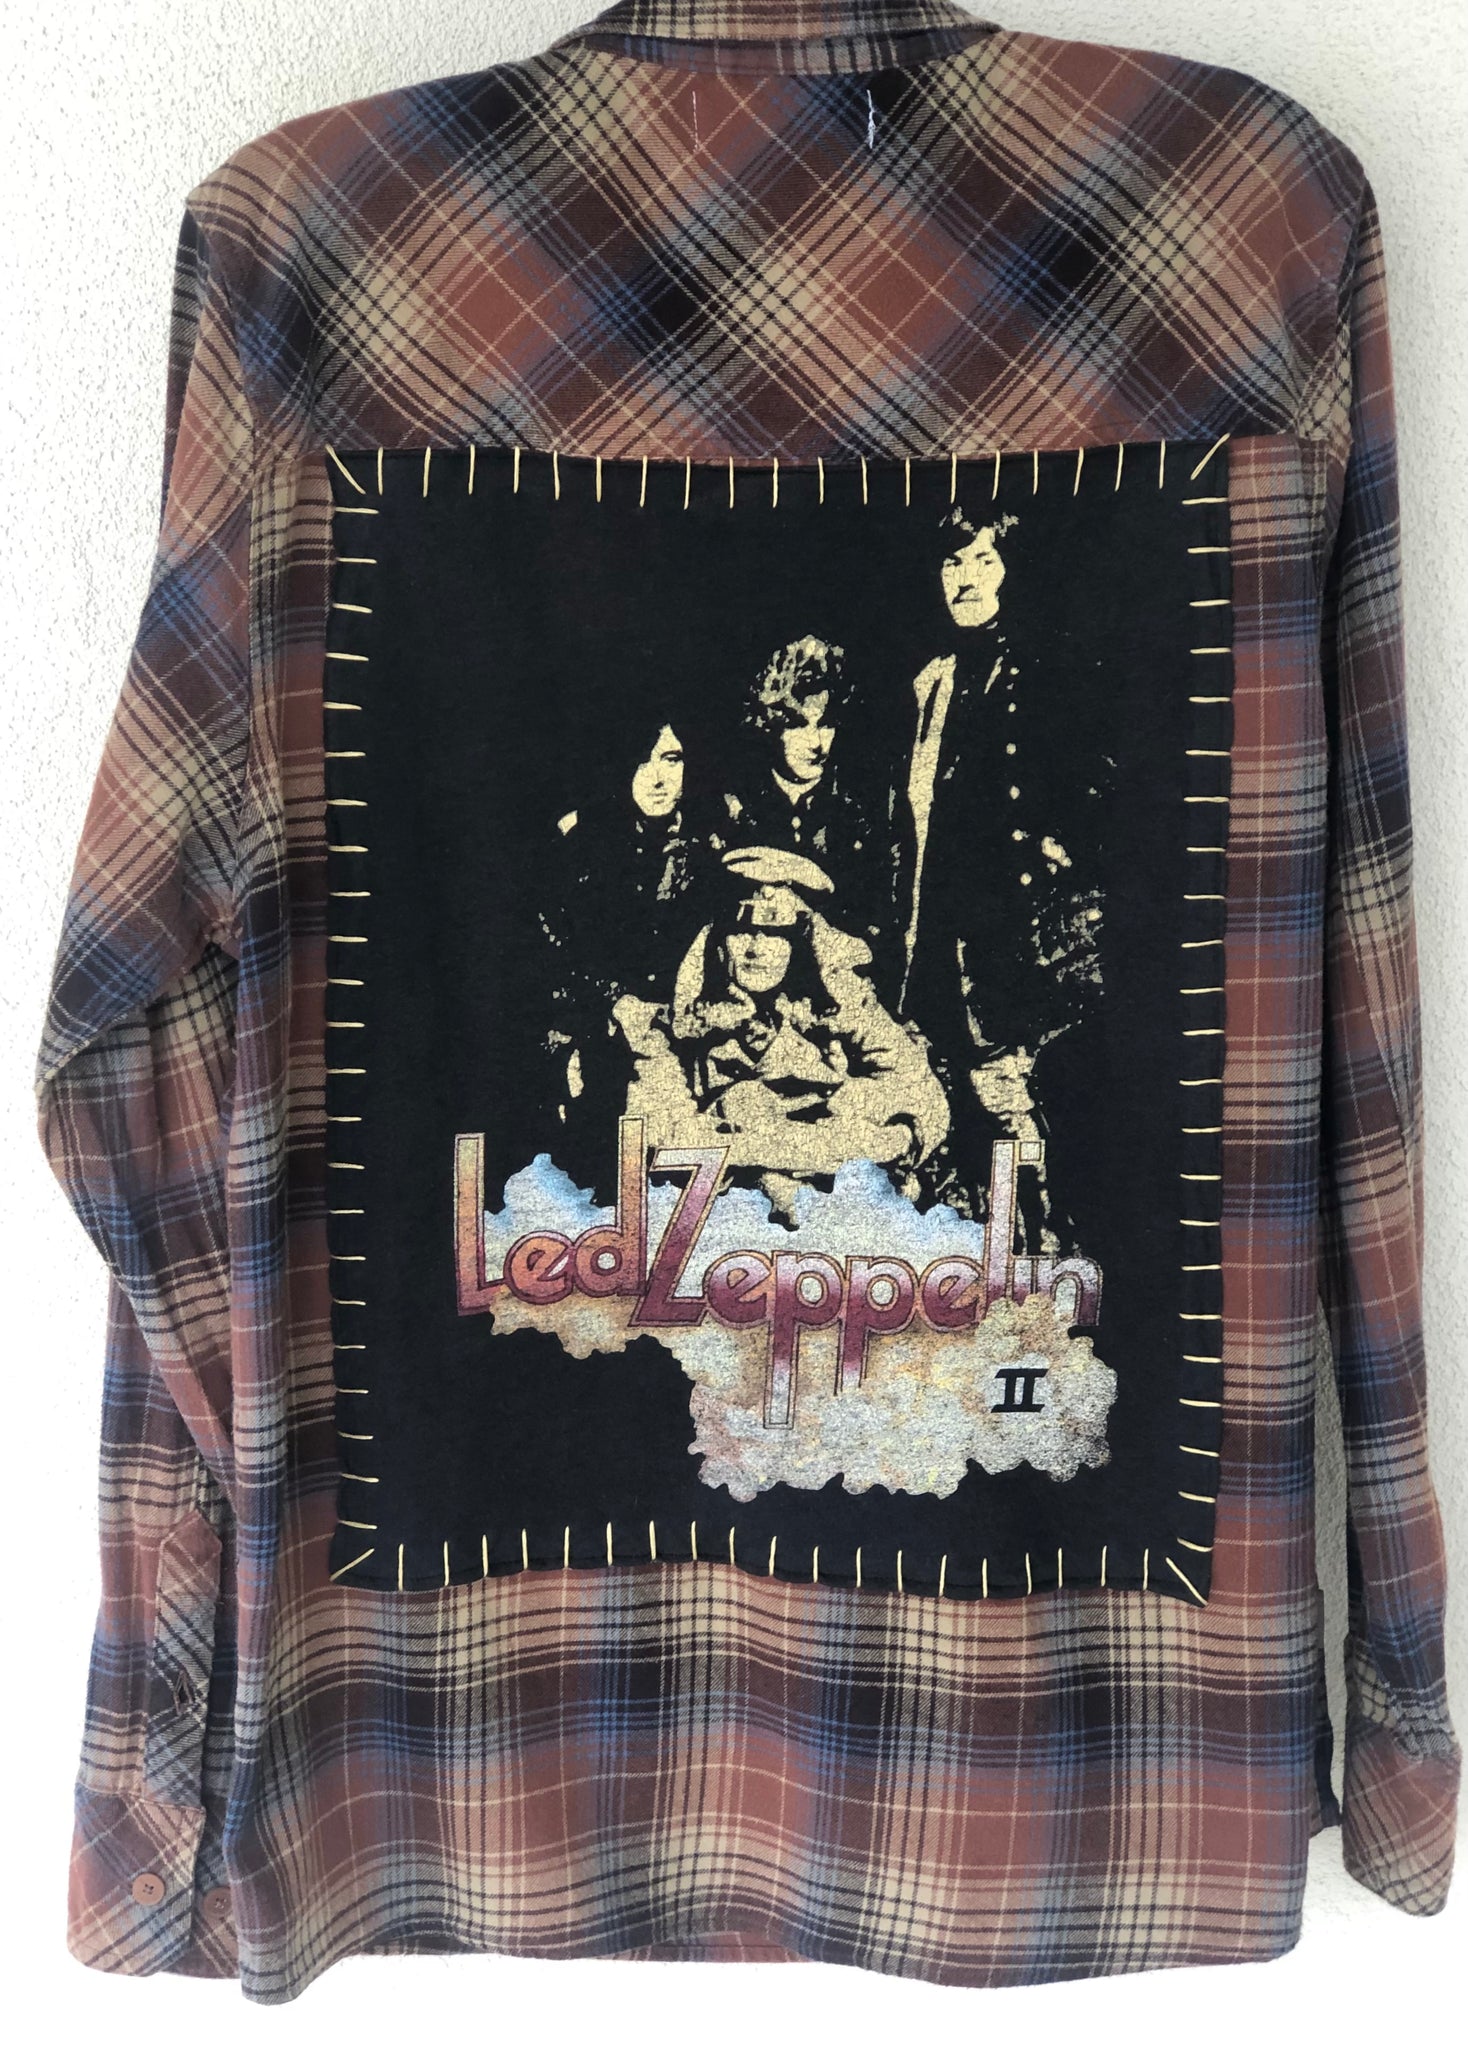 Led Zeppelin Upcycled Flannel